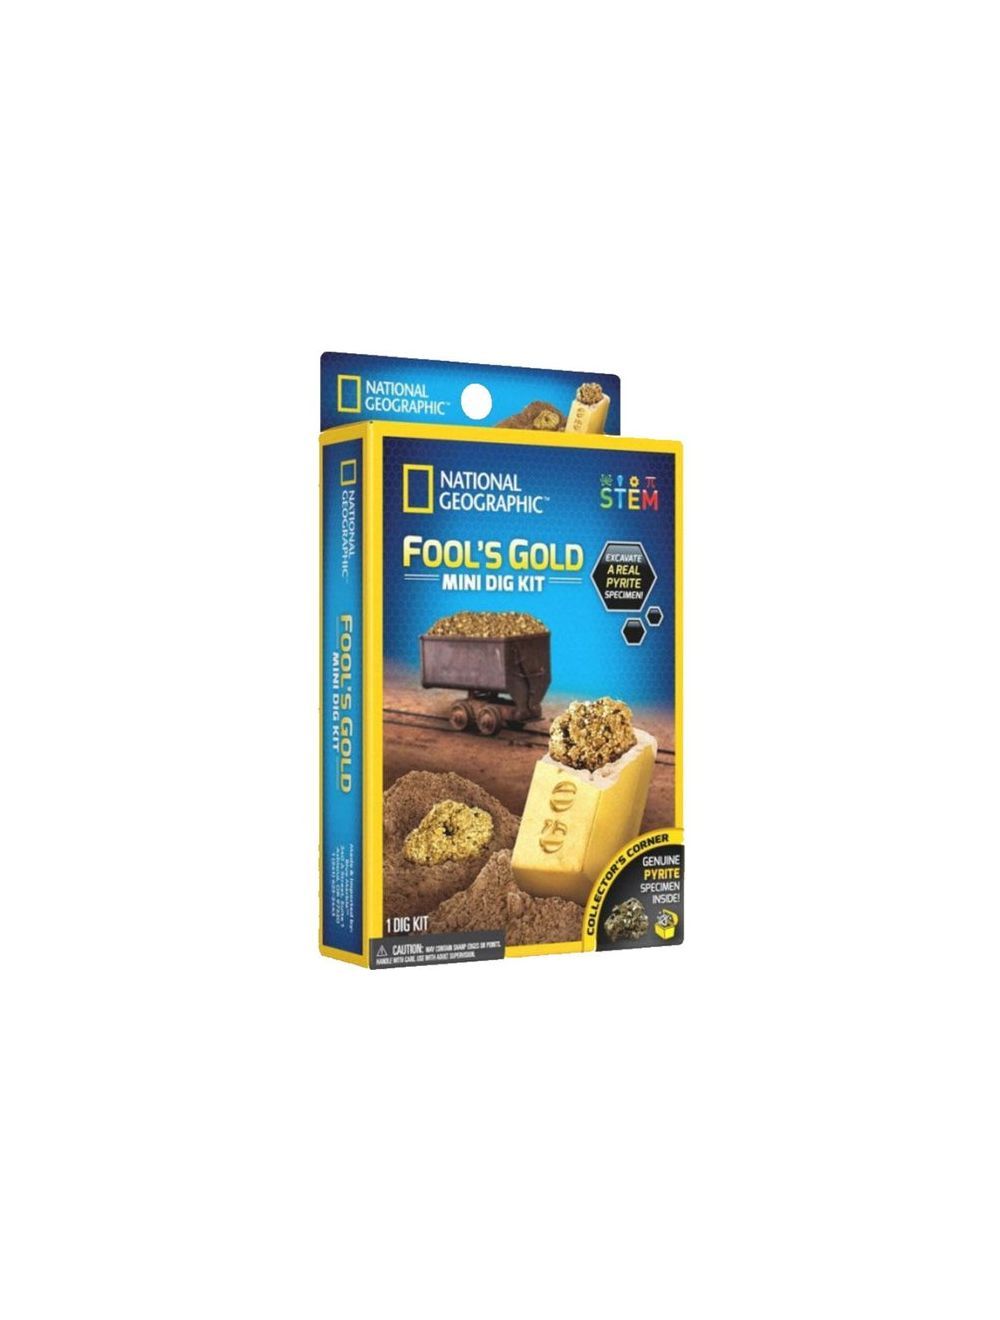 National Geographic Fool's Gold Dig Kits